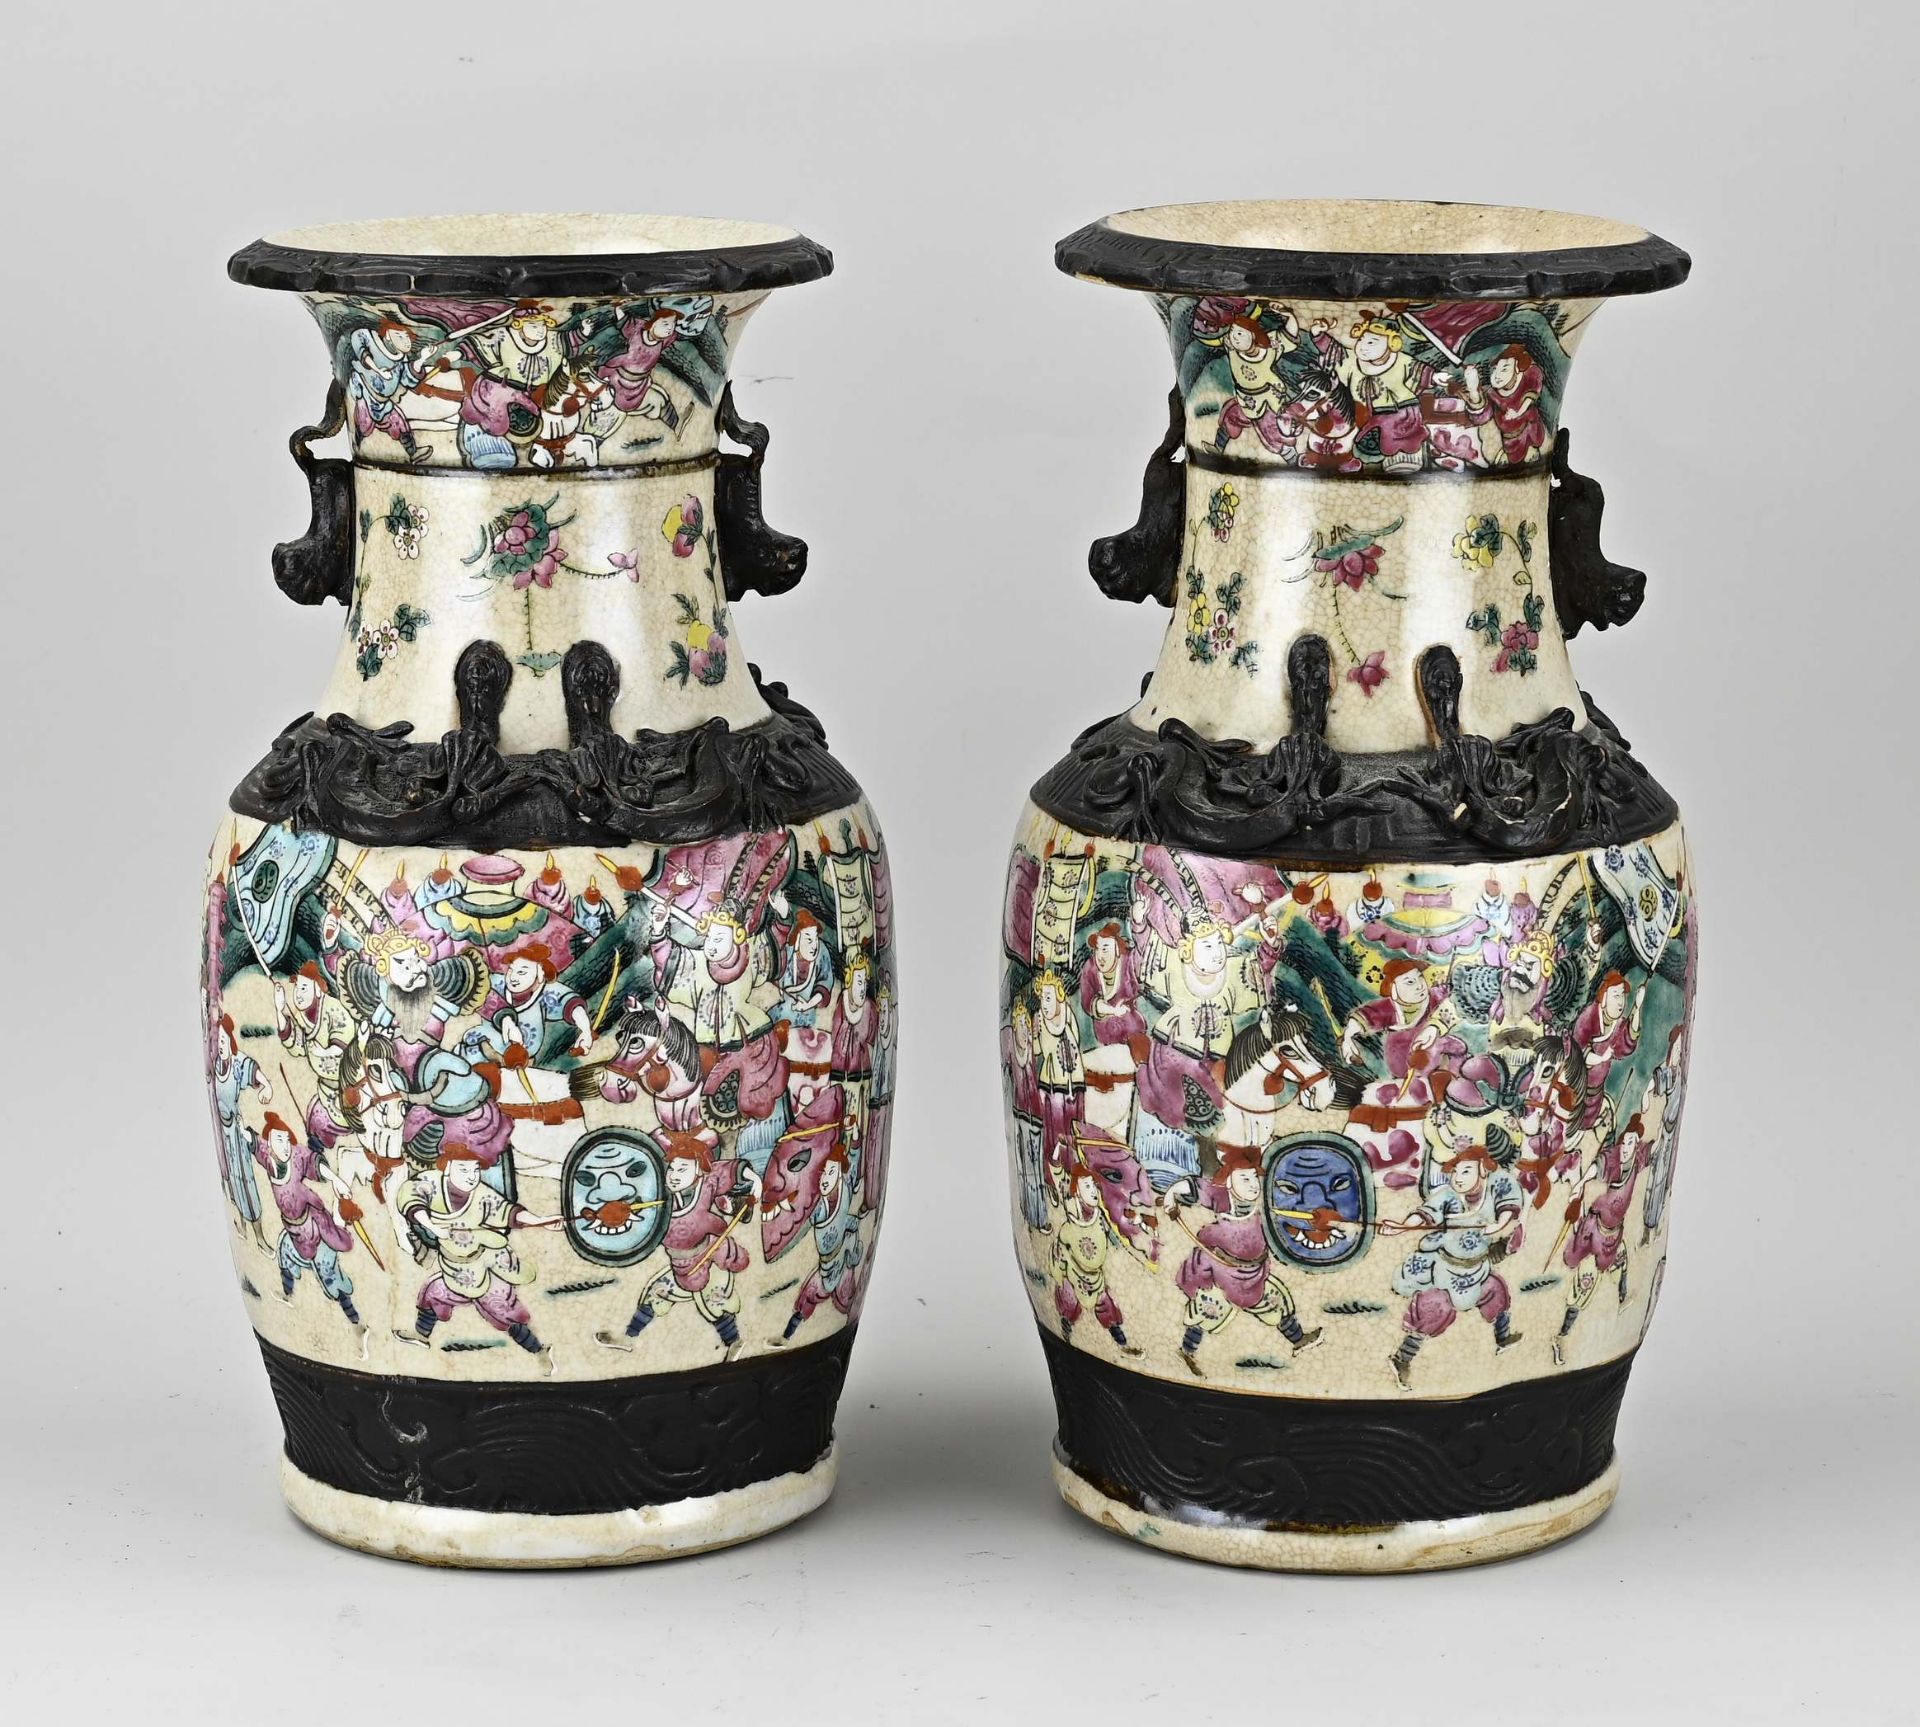 Two antique Chinese porcelain Cantonese vases